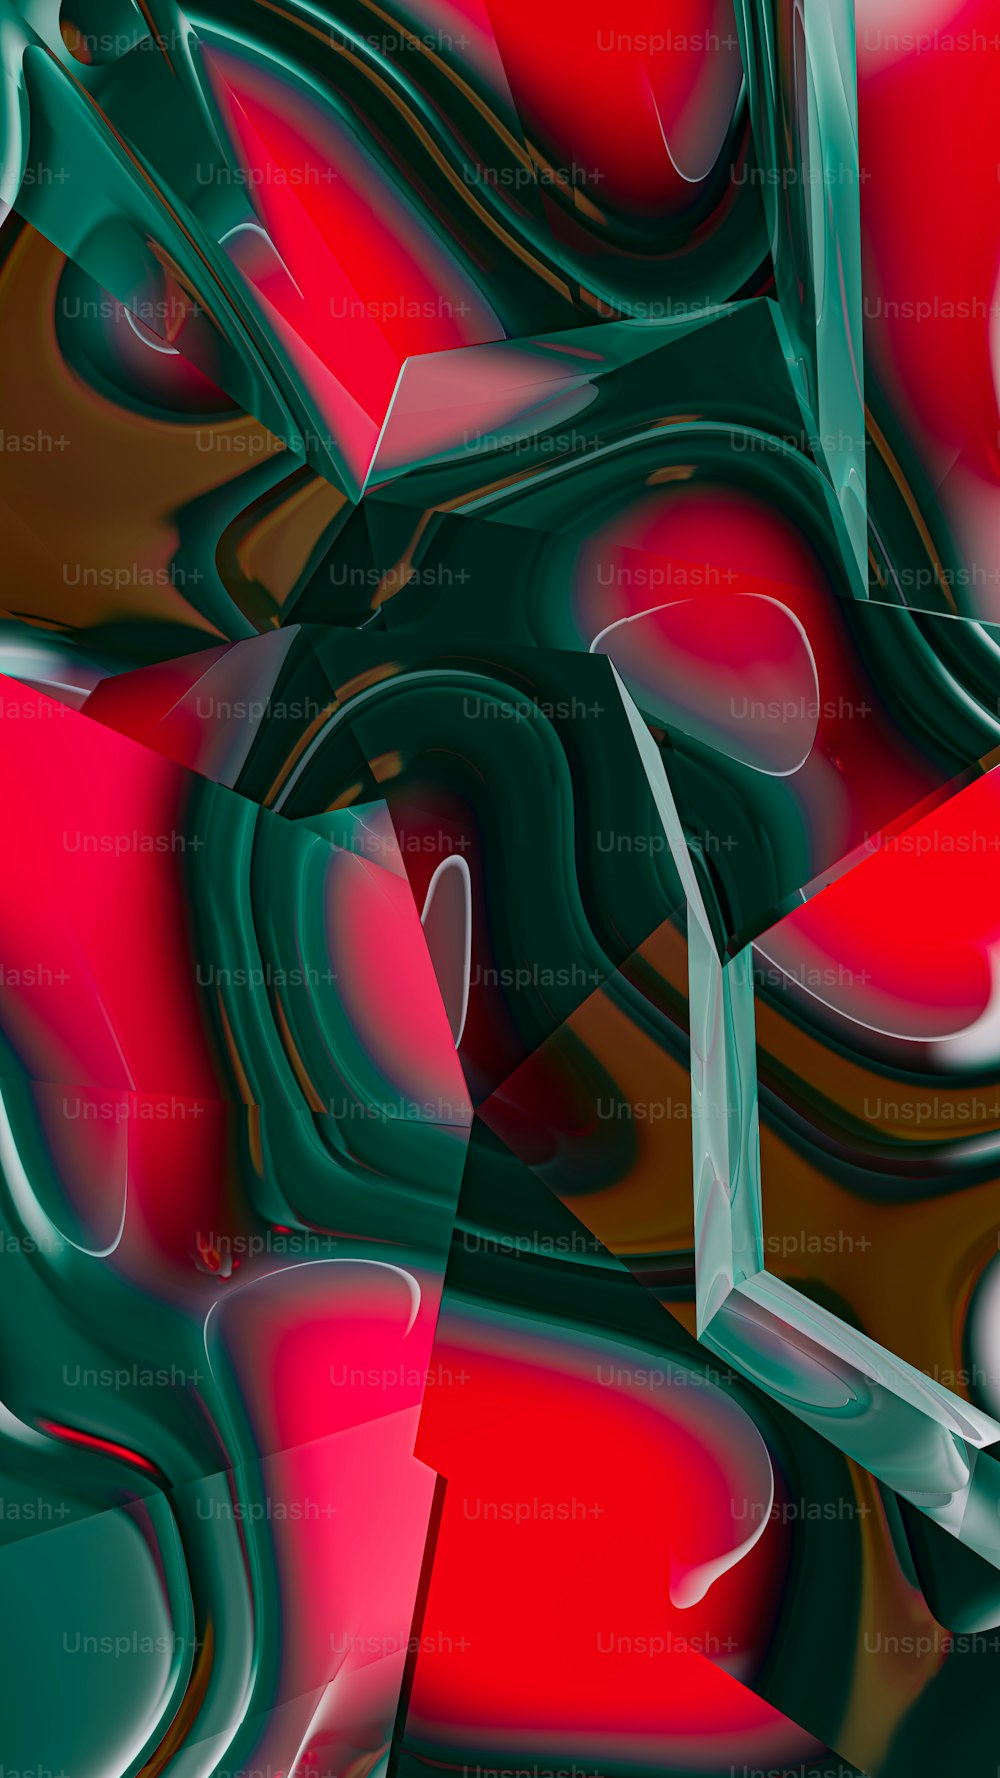 a red and green abstract design with a black background